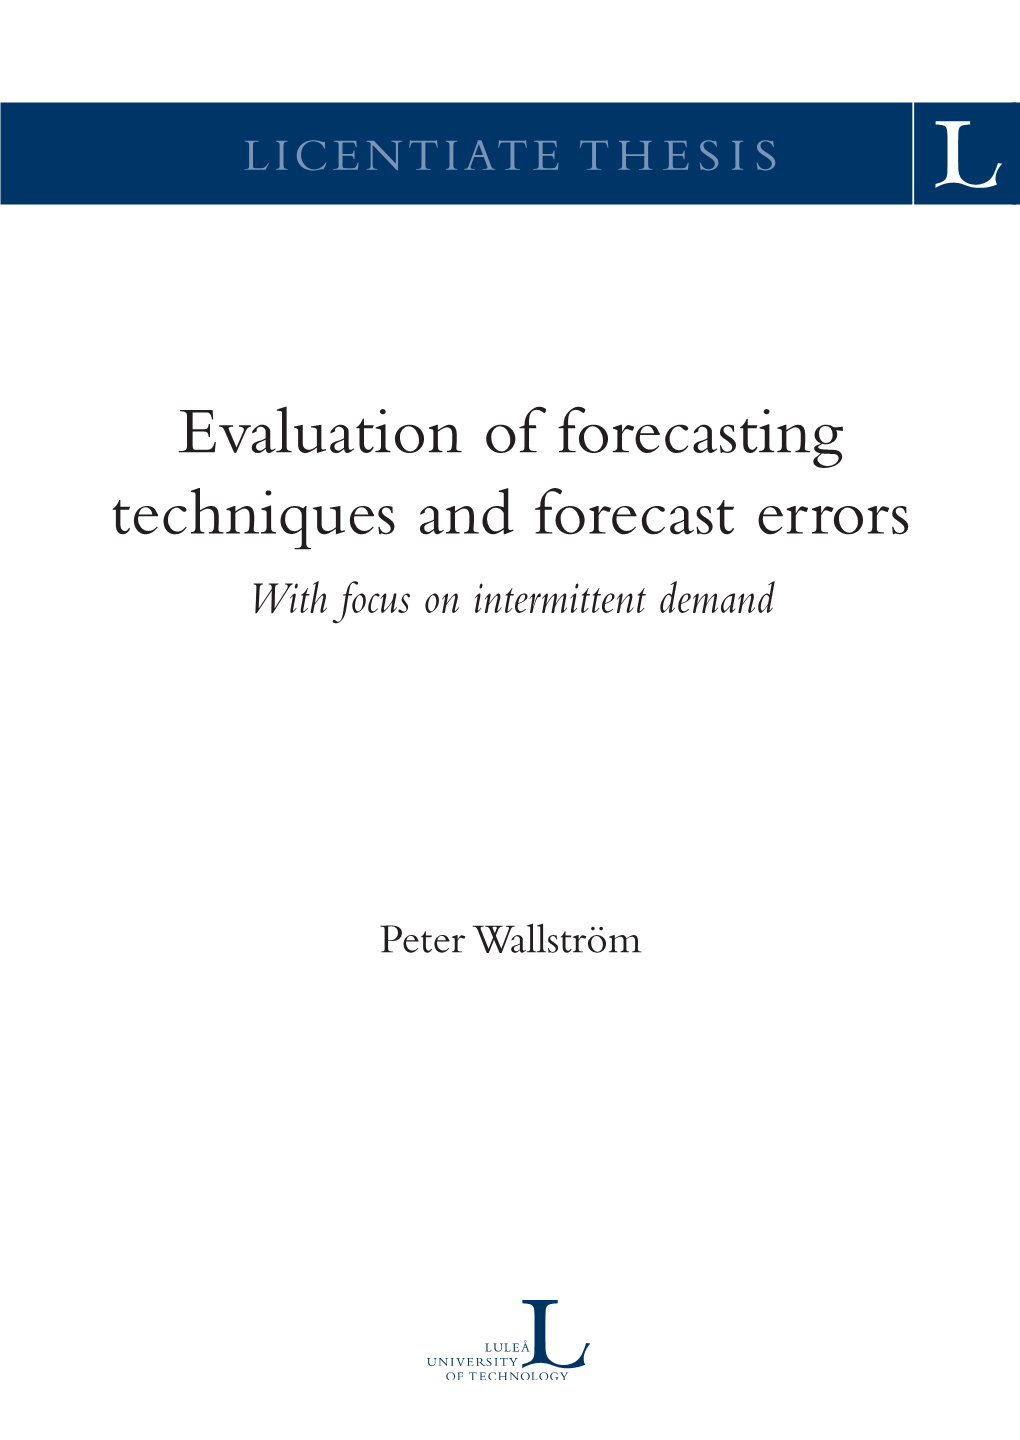 Evaluation of Forecasting Techniques and Forecast Errors